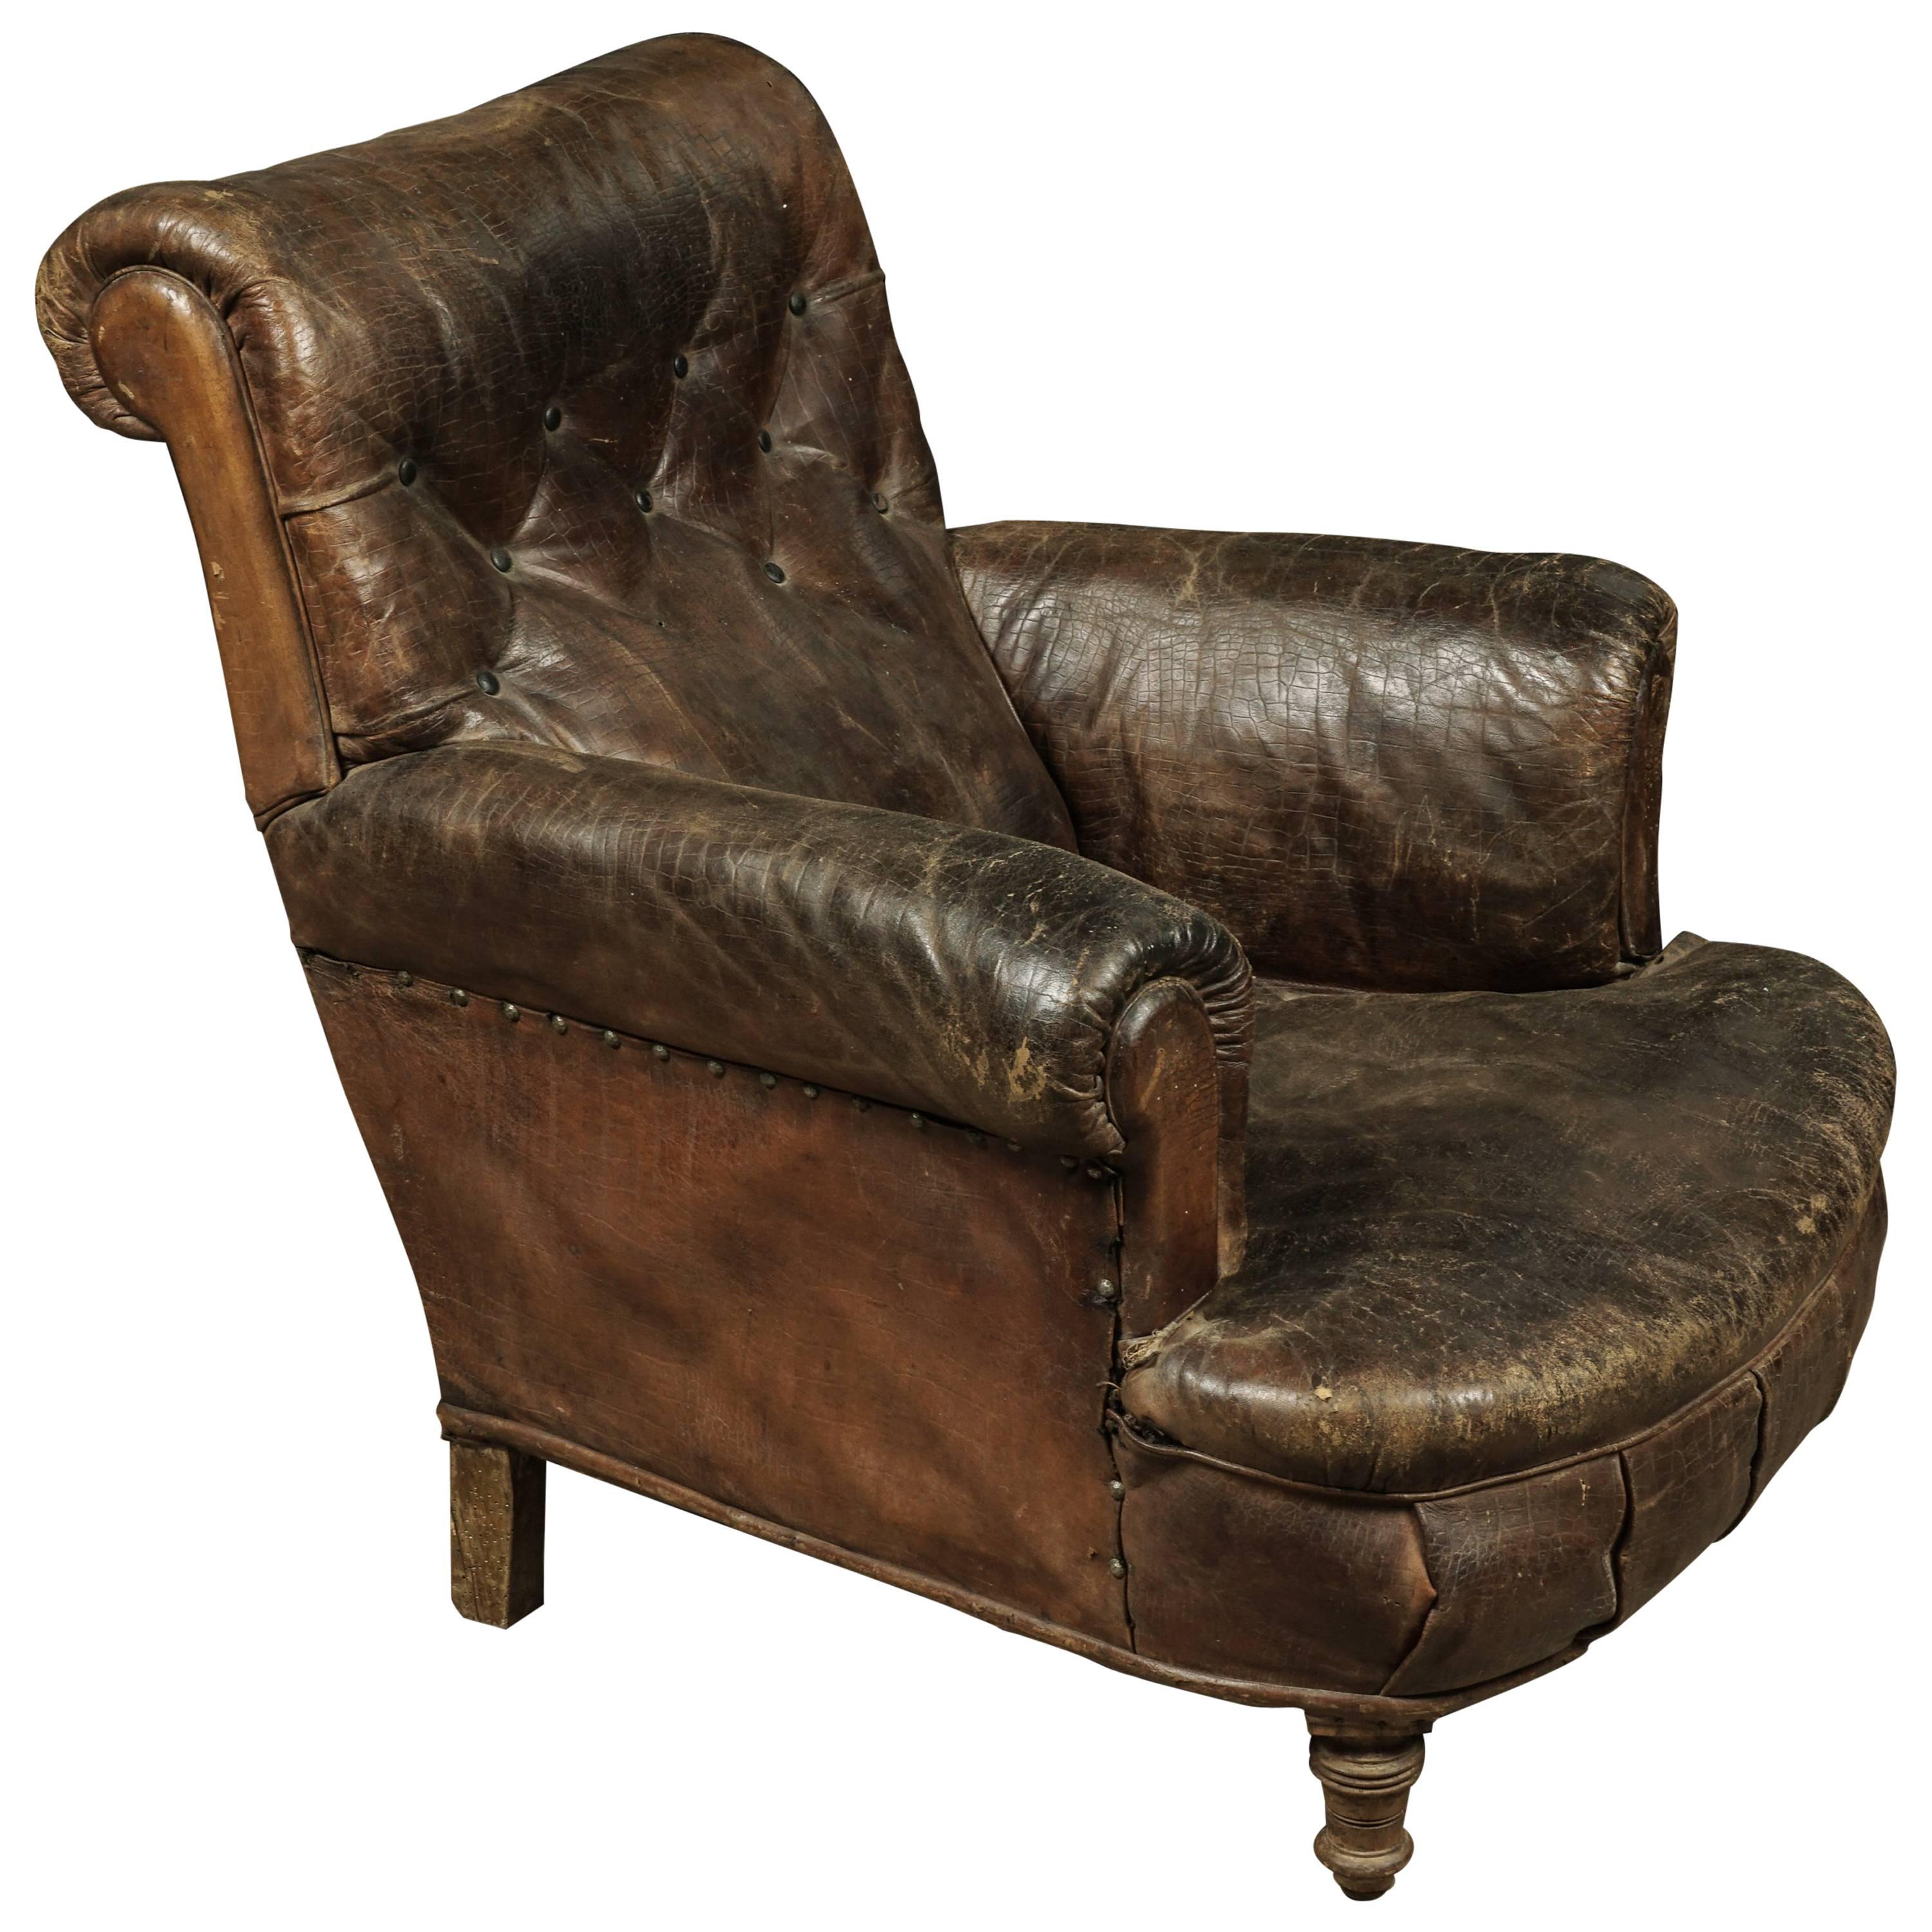 Early Leather Club Chair from France, circa 1900